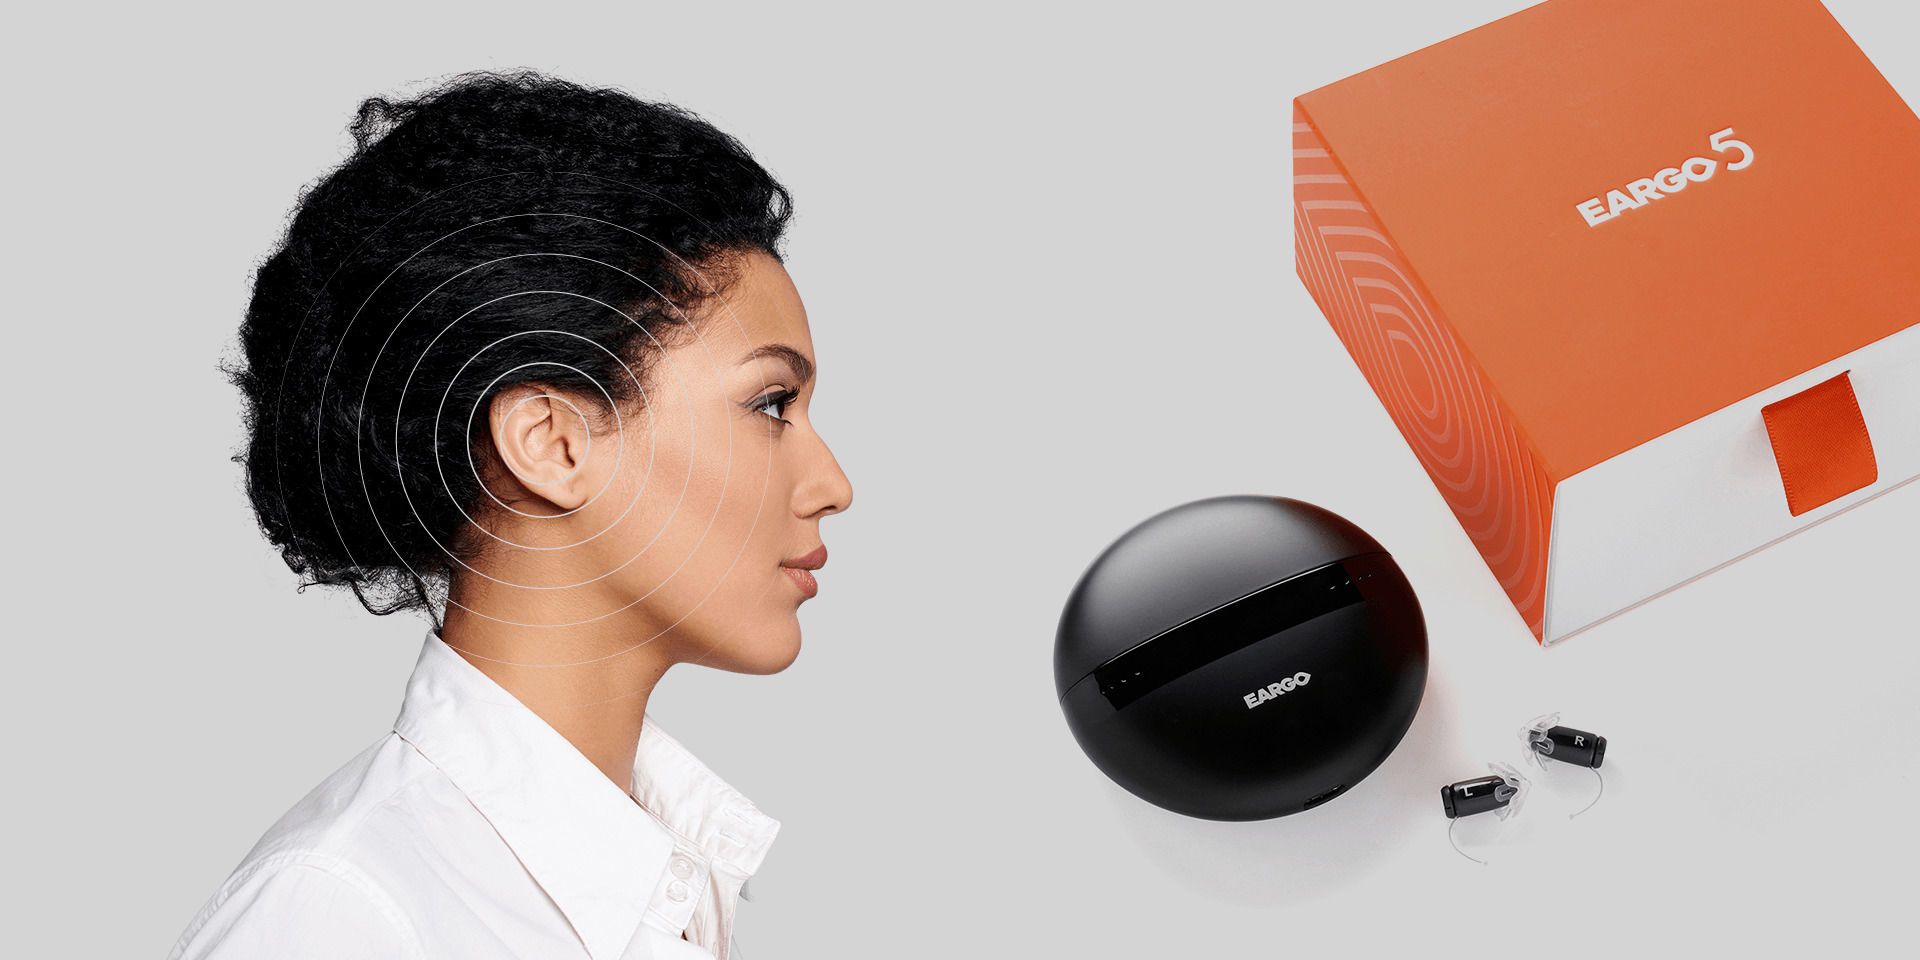 Woman with mild hearing loss next to the charger and box for Eargo 5 hearing aids